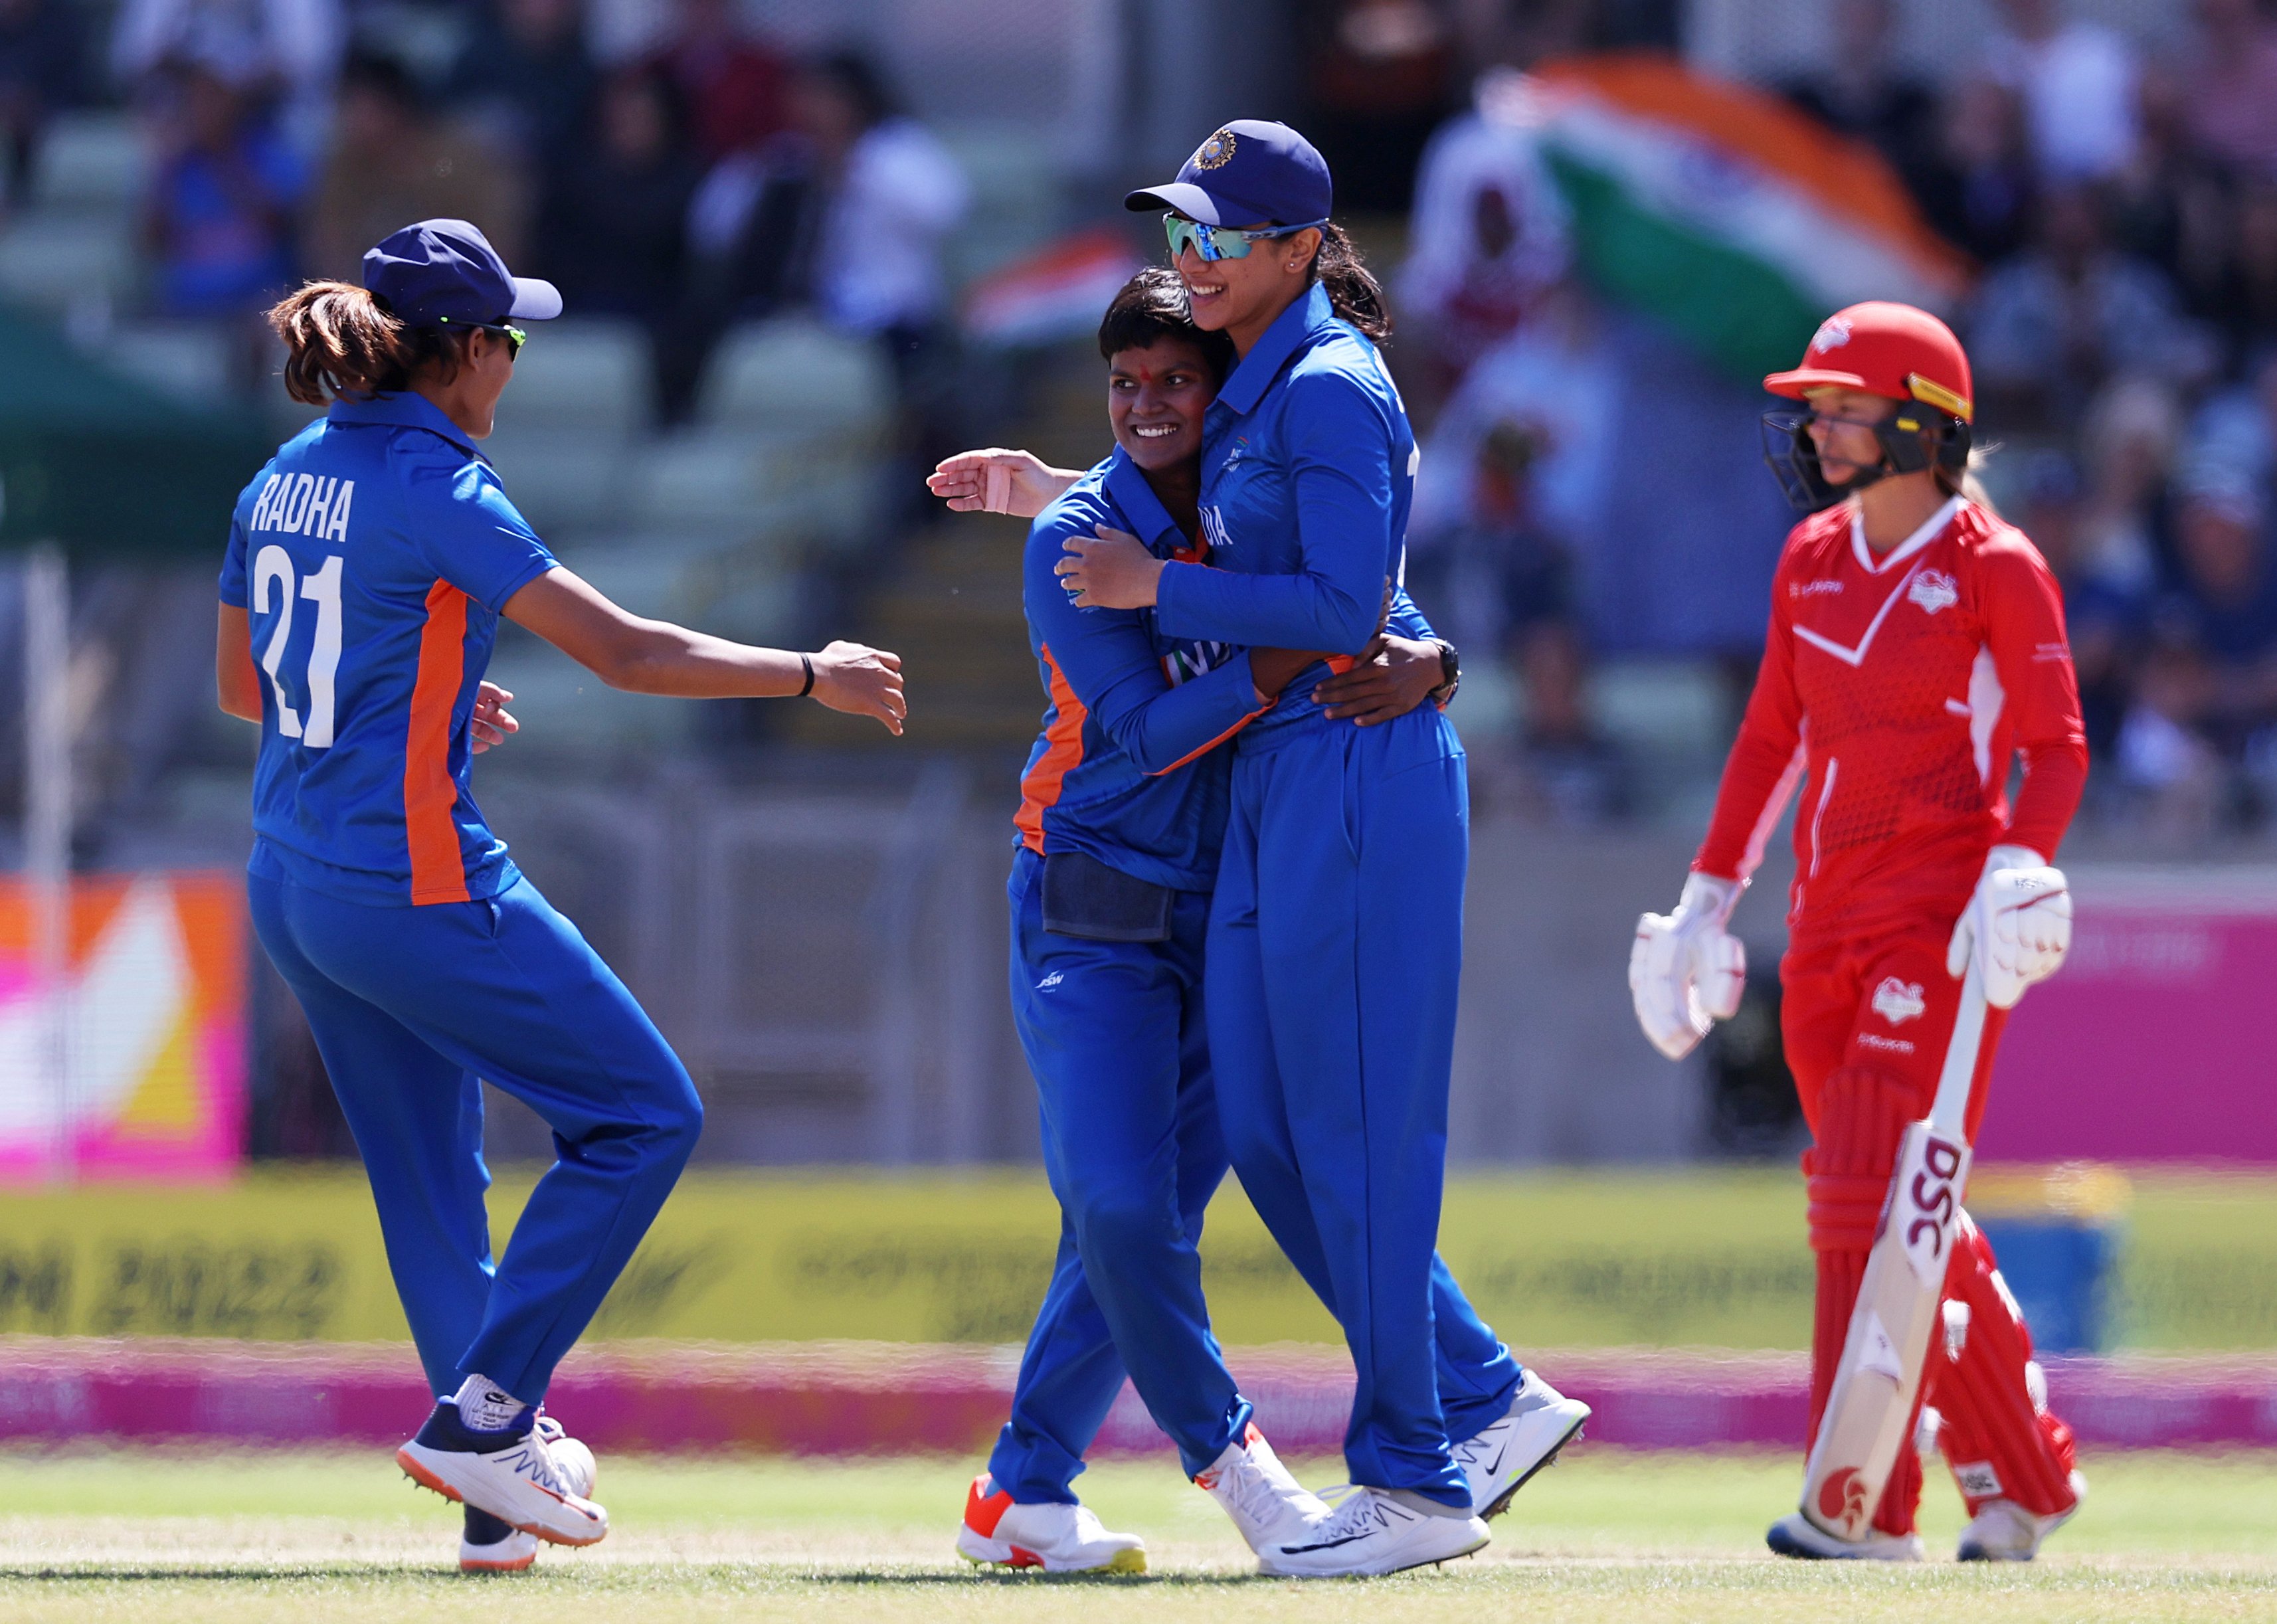 The Hundred: After CWG 2022 heroics, Indian trio Smriti Mandhana, Jemimah Rodrigues, Deepti Sharma set to play The Hundred ahead of England tour - Check out